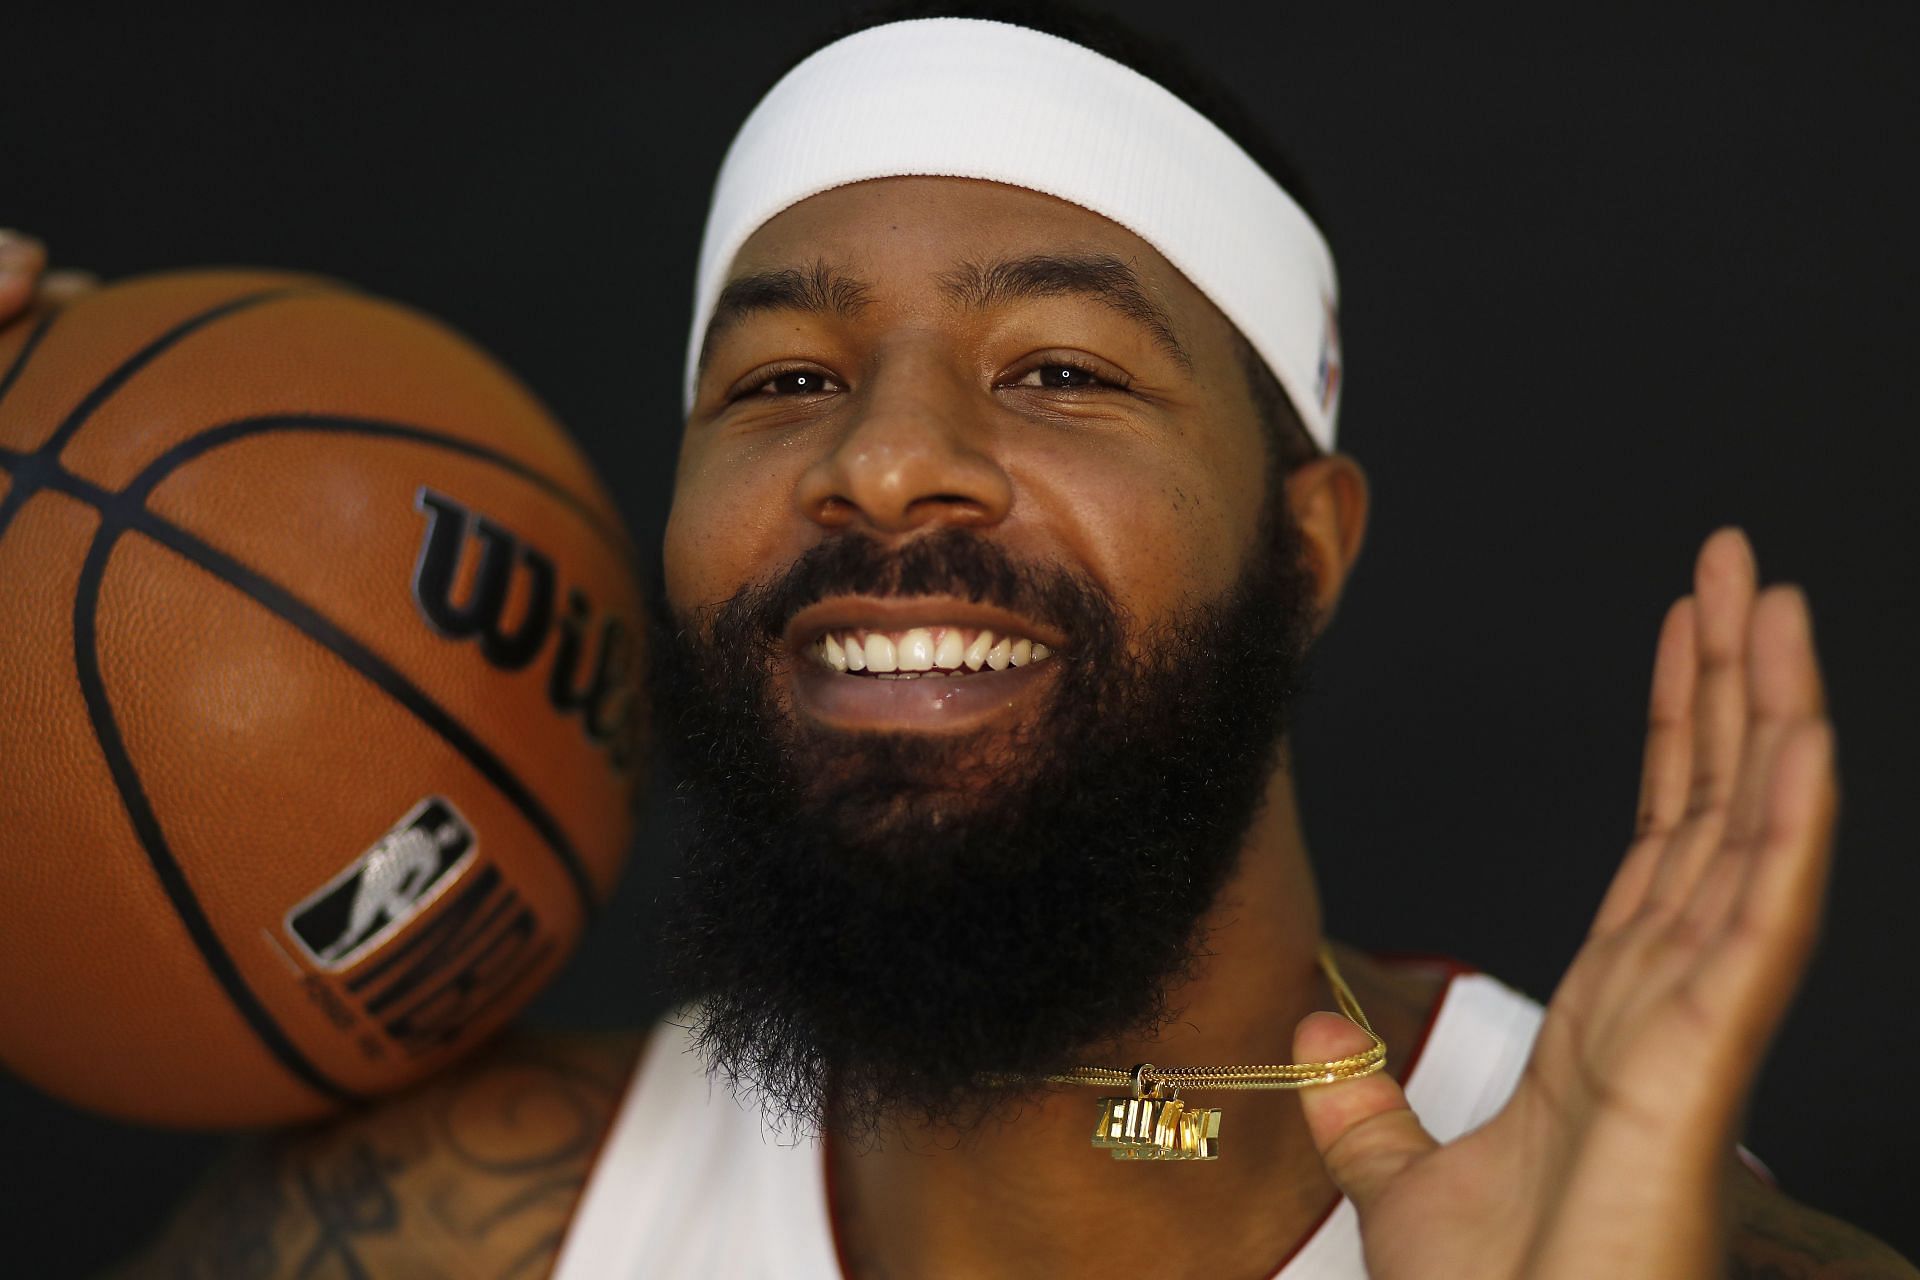 Markieff Morris #8 of the Miami Heat poses for a photo during Media Day at FTX Arena on September 27, 2021 in Miami, Florida.